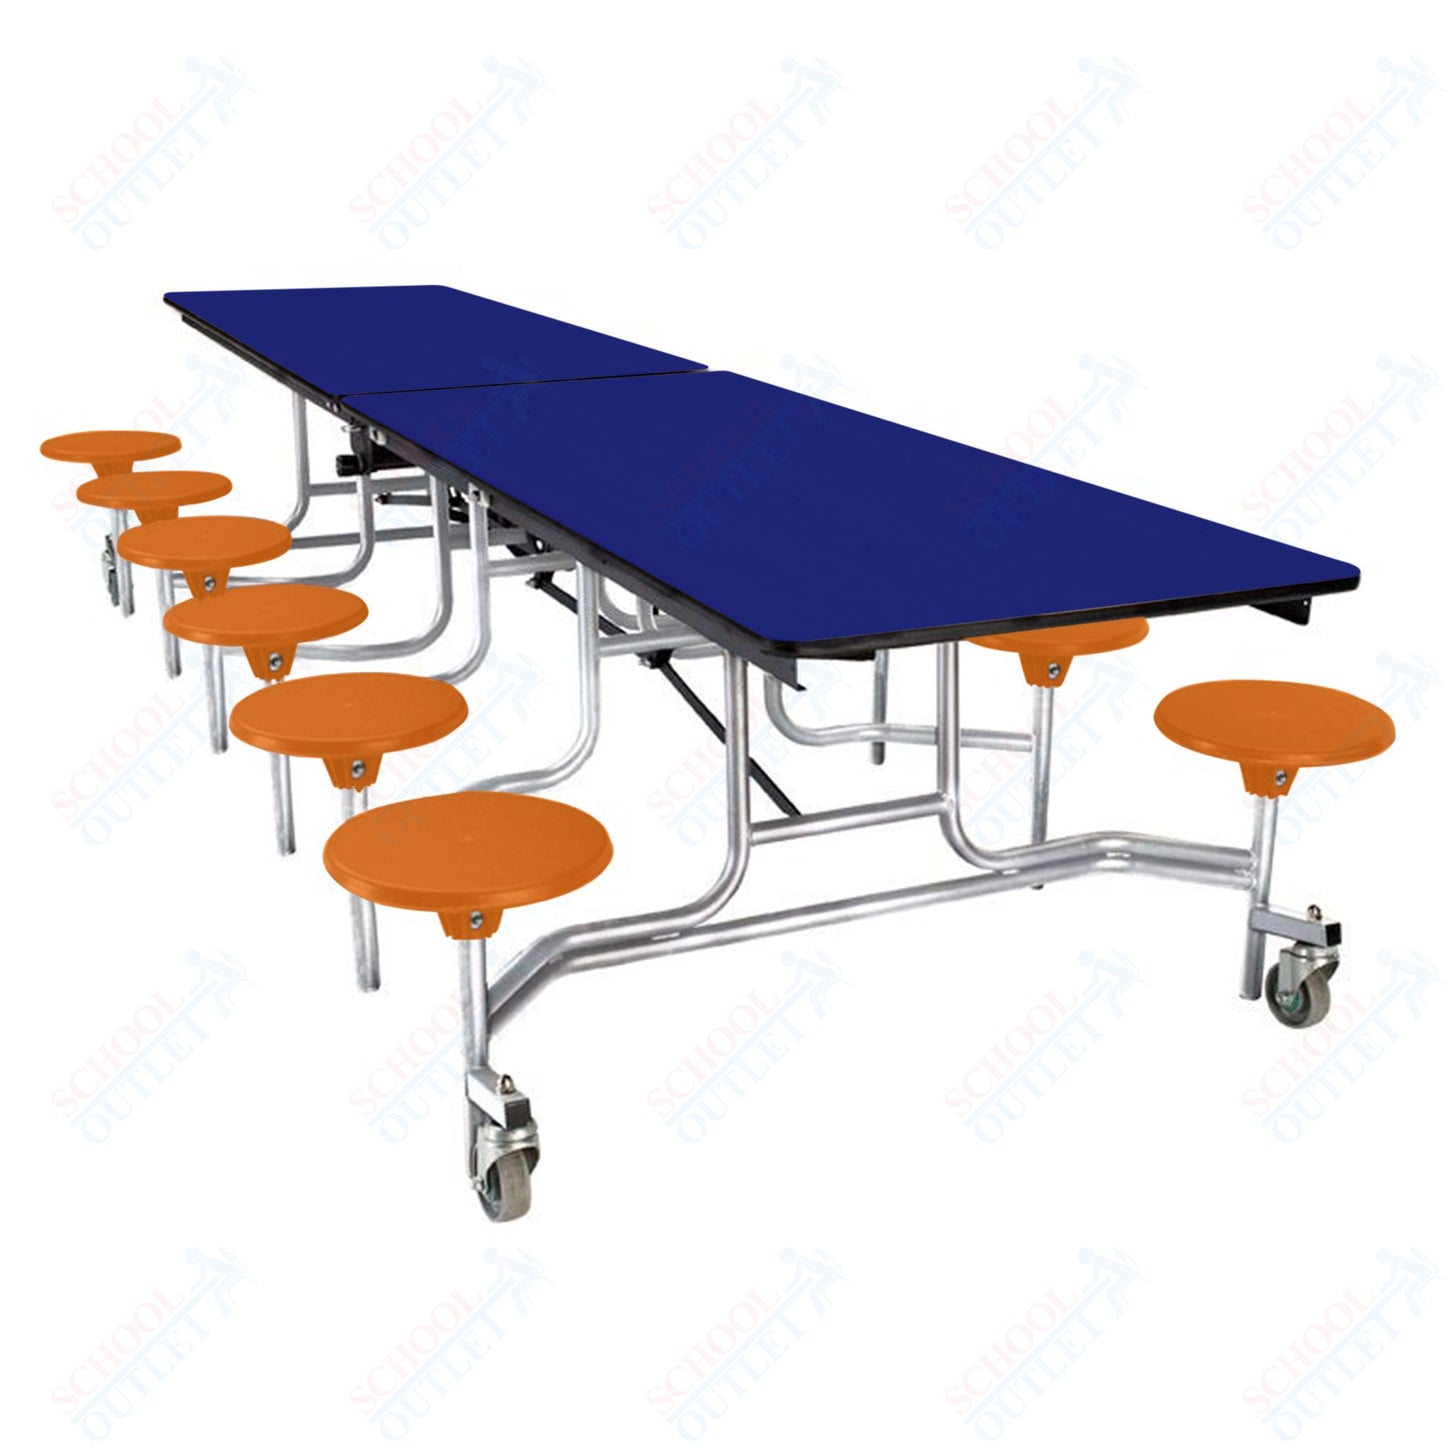 NPS Mobile Cafeteria Table - 30" W x 10' L - 12 Stools  - Plywood Core - Protect Edge - Chrome Frame